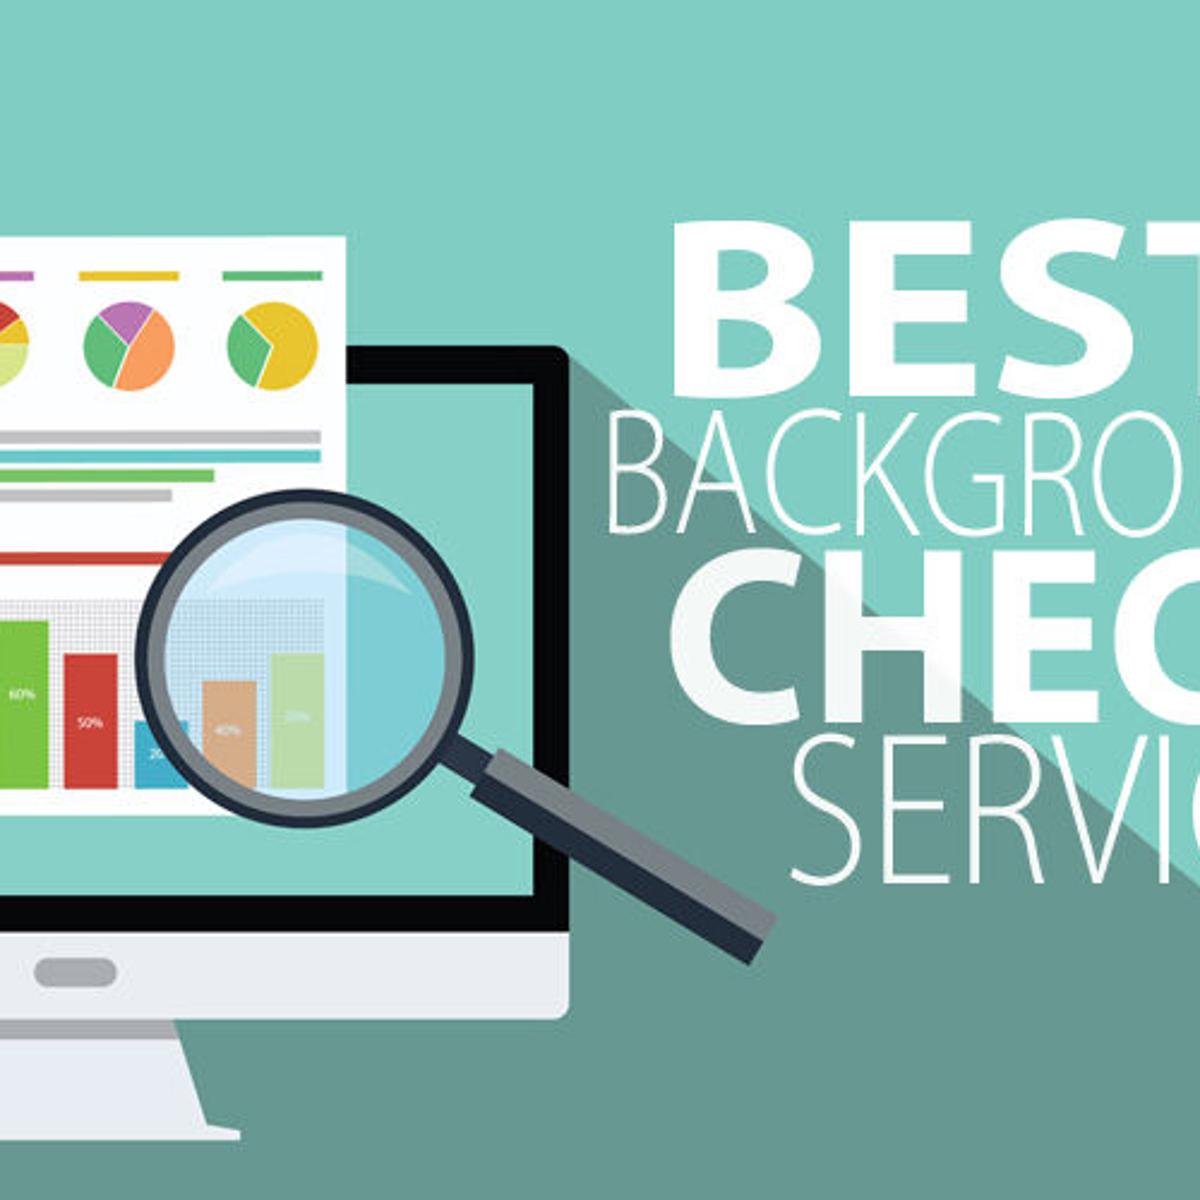 10 Best Background Check Services: Popular Tools to Search Criminal Records,  Arrest Records & More! | Sponsored: Background Check Services 